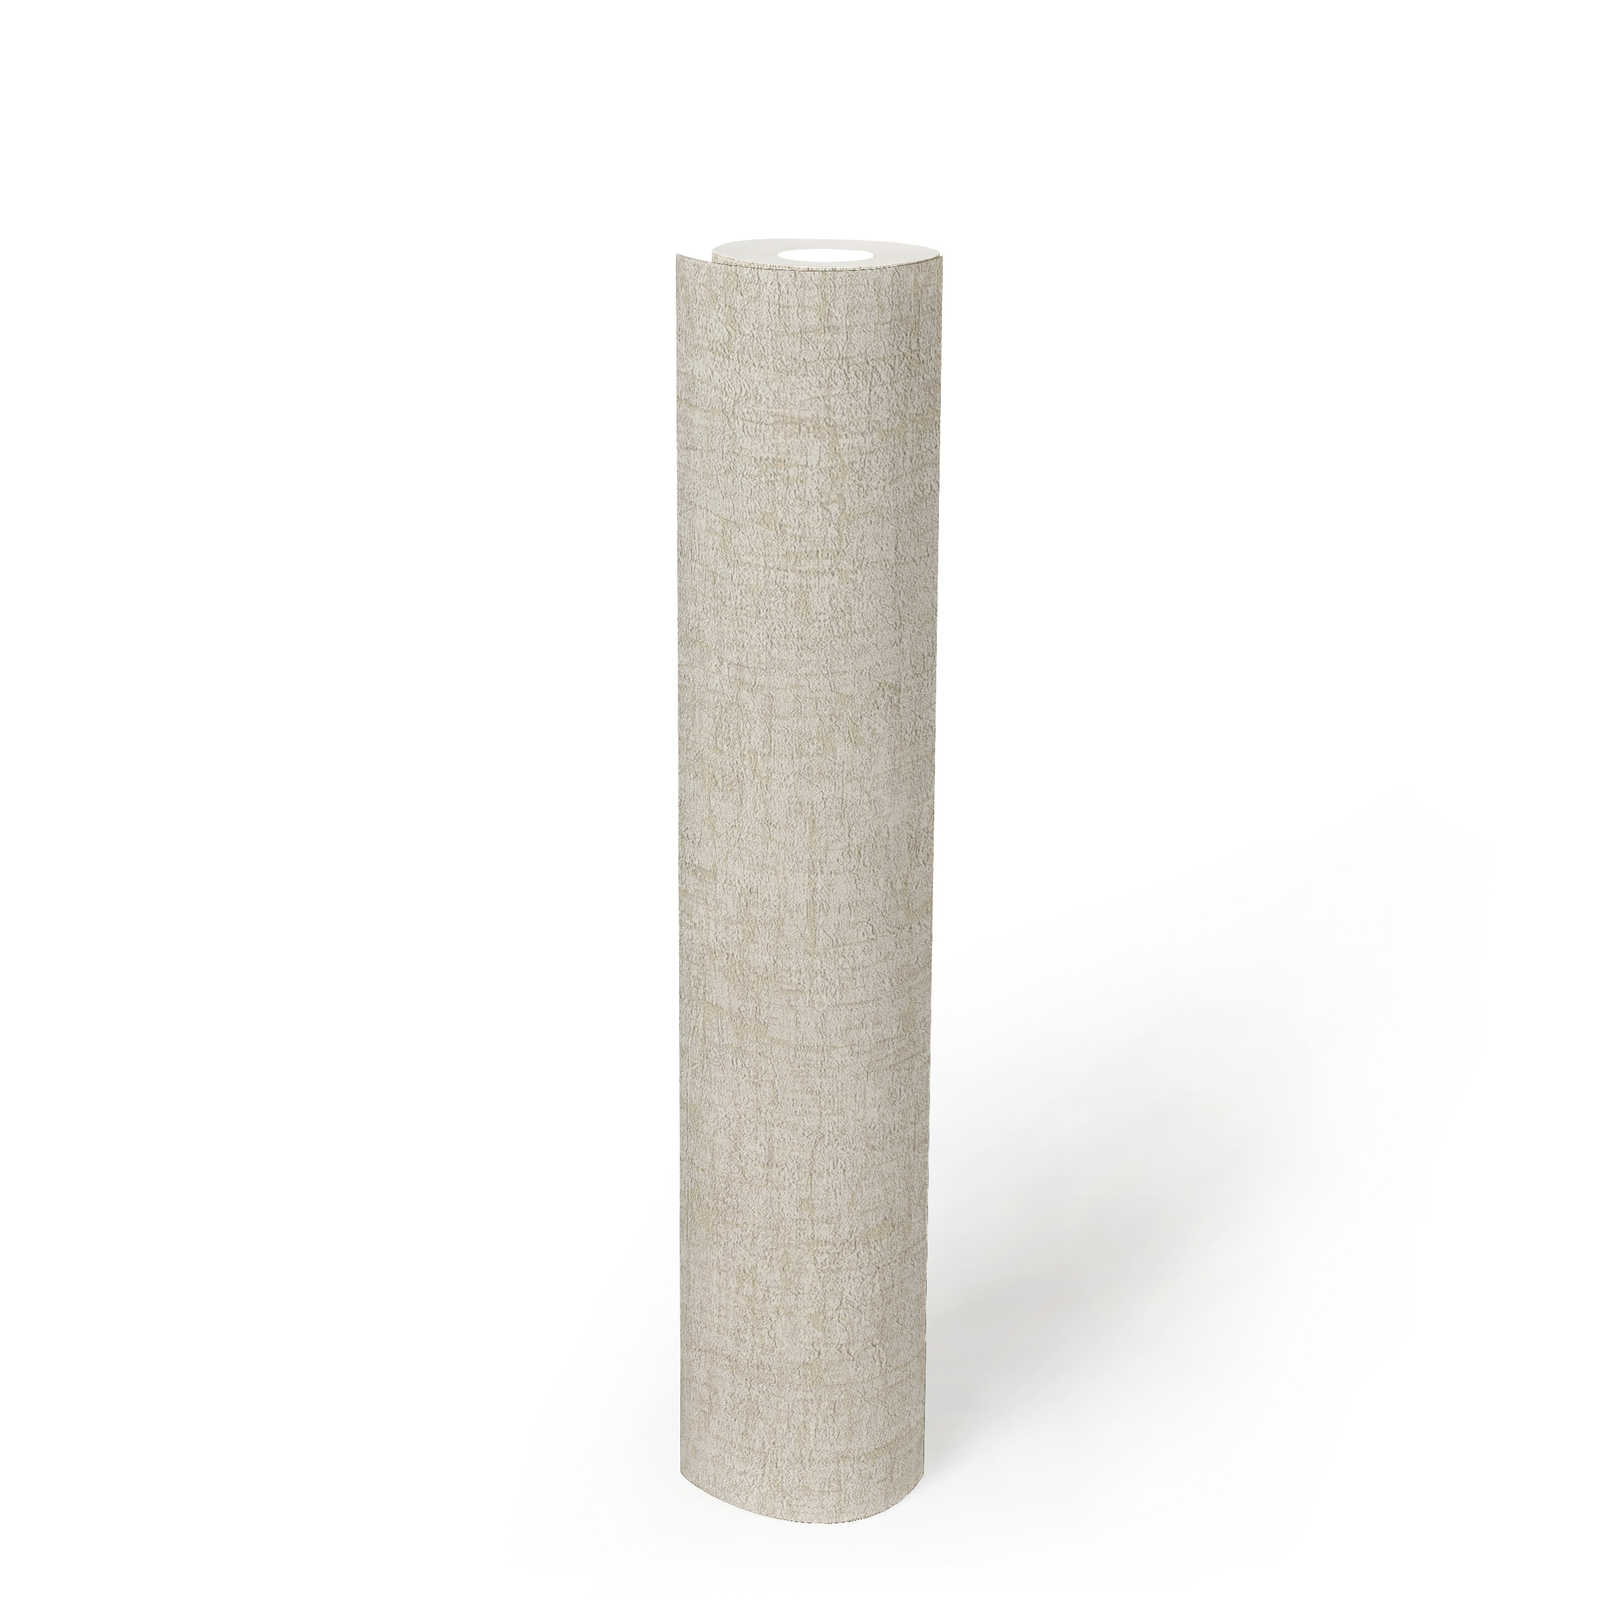             Non-woven wallpaper with texture in soft colours textile look - white, beige, cream
        